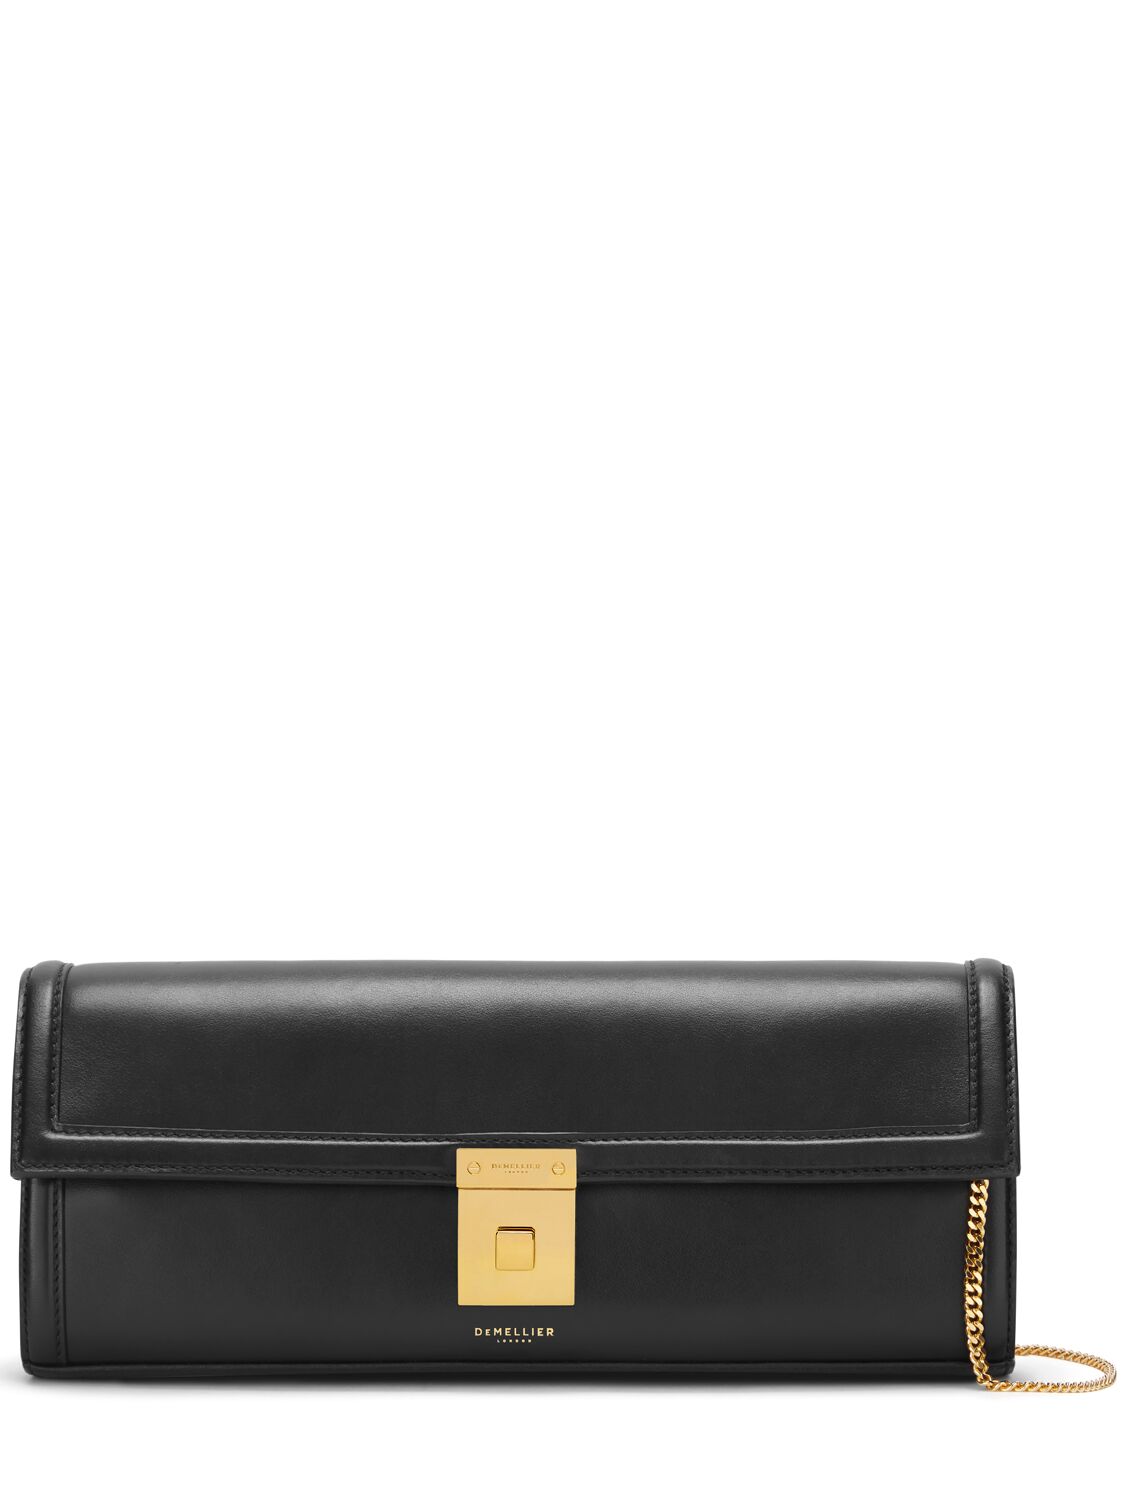 Paris Smooth Leather Clutch